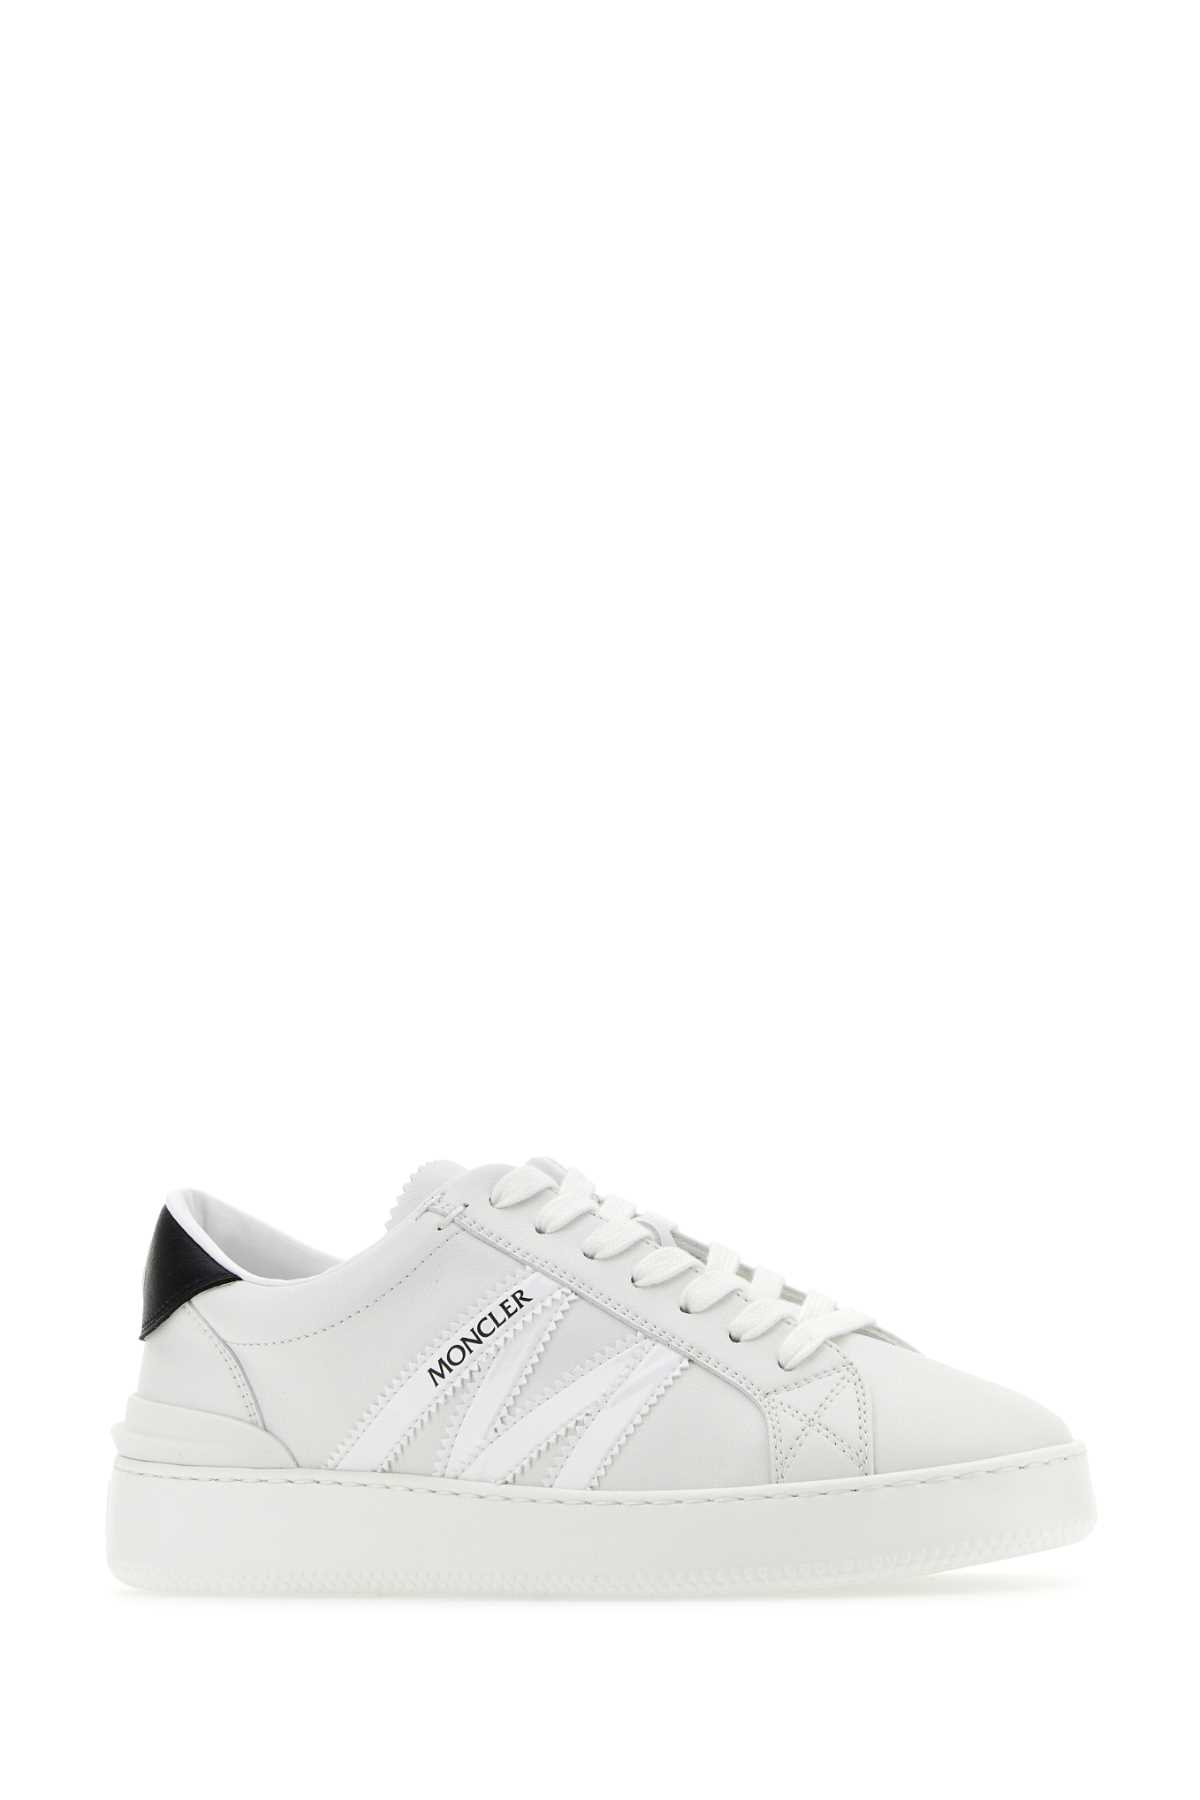 Moncler White Leather Monaco M Sneakers In P09